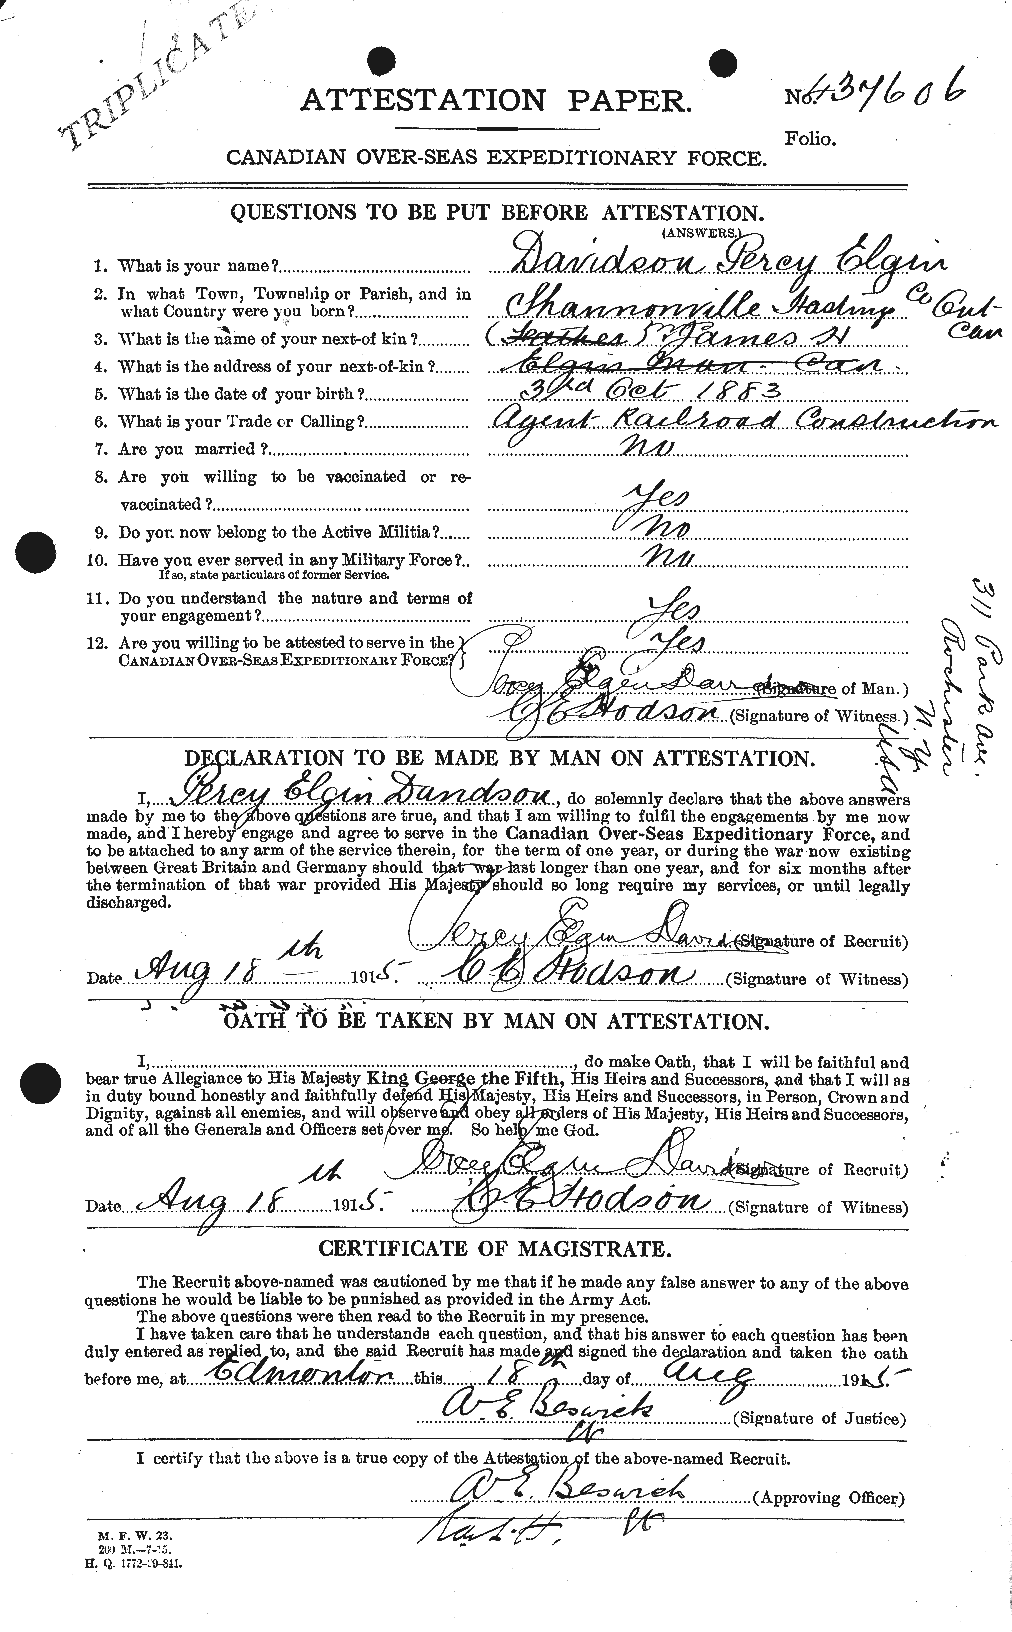 Personnel Records of the First World War - CEF 276875a